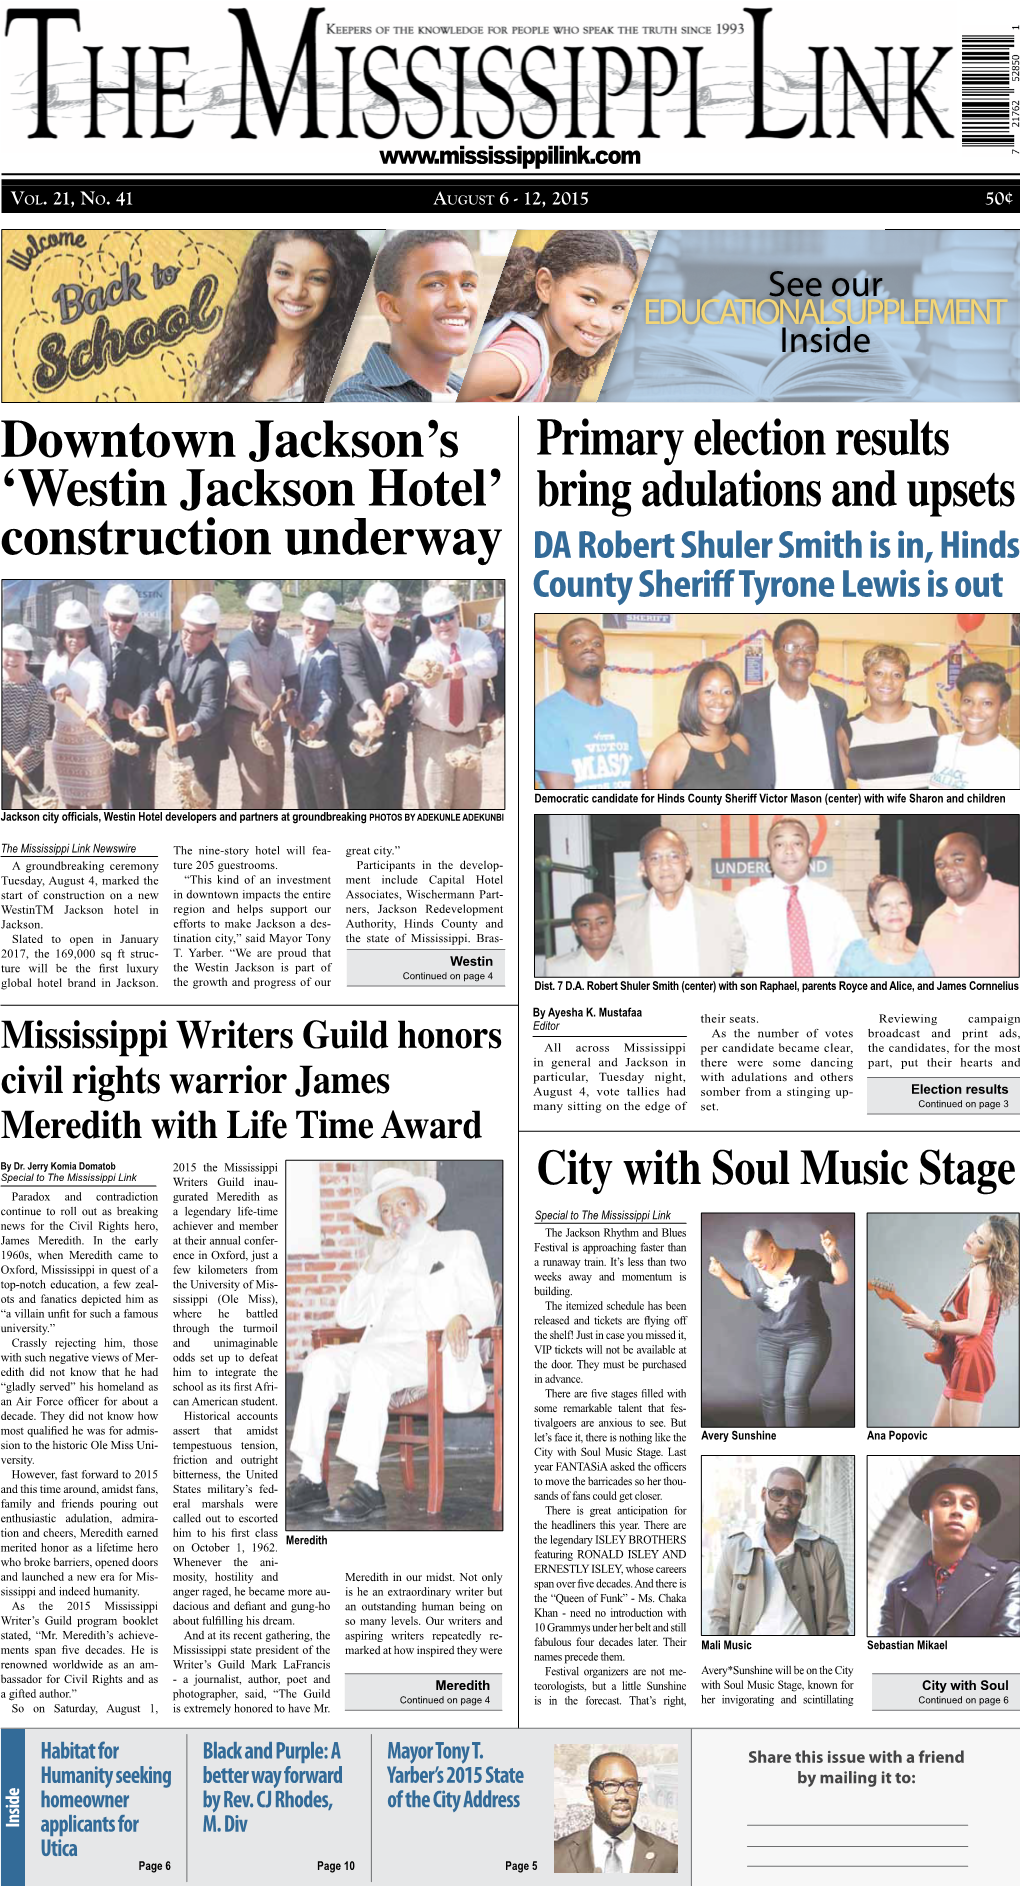 Westin Jackson Hotel’ Bring Adulations and Upsets Construction Underway DA Robert Shuler Smith Is In, Hinds County Sheriff Tyrone Lewis Is Out